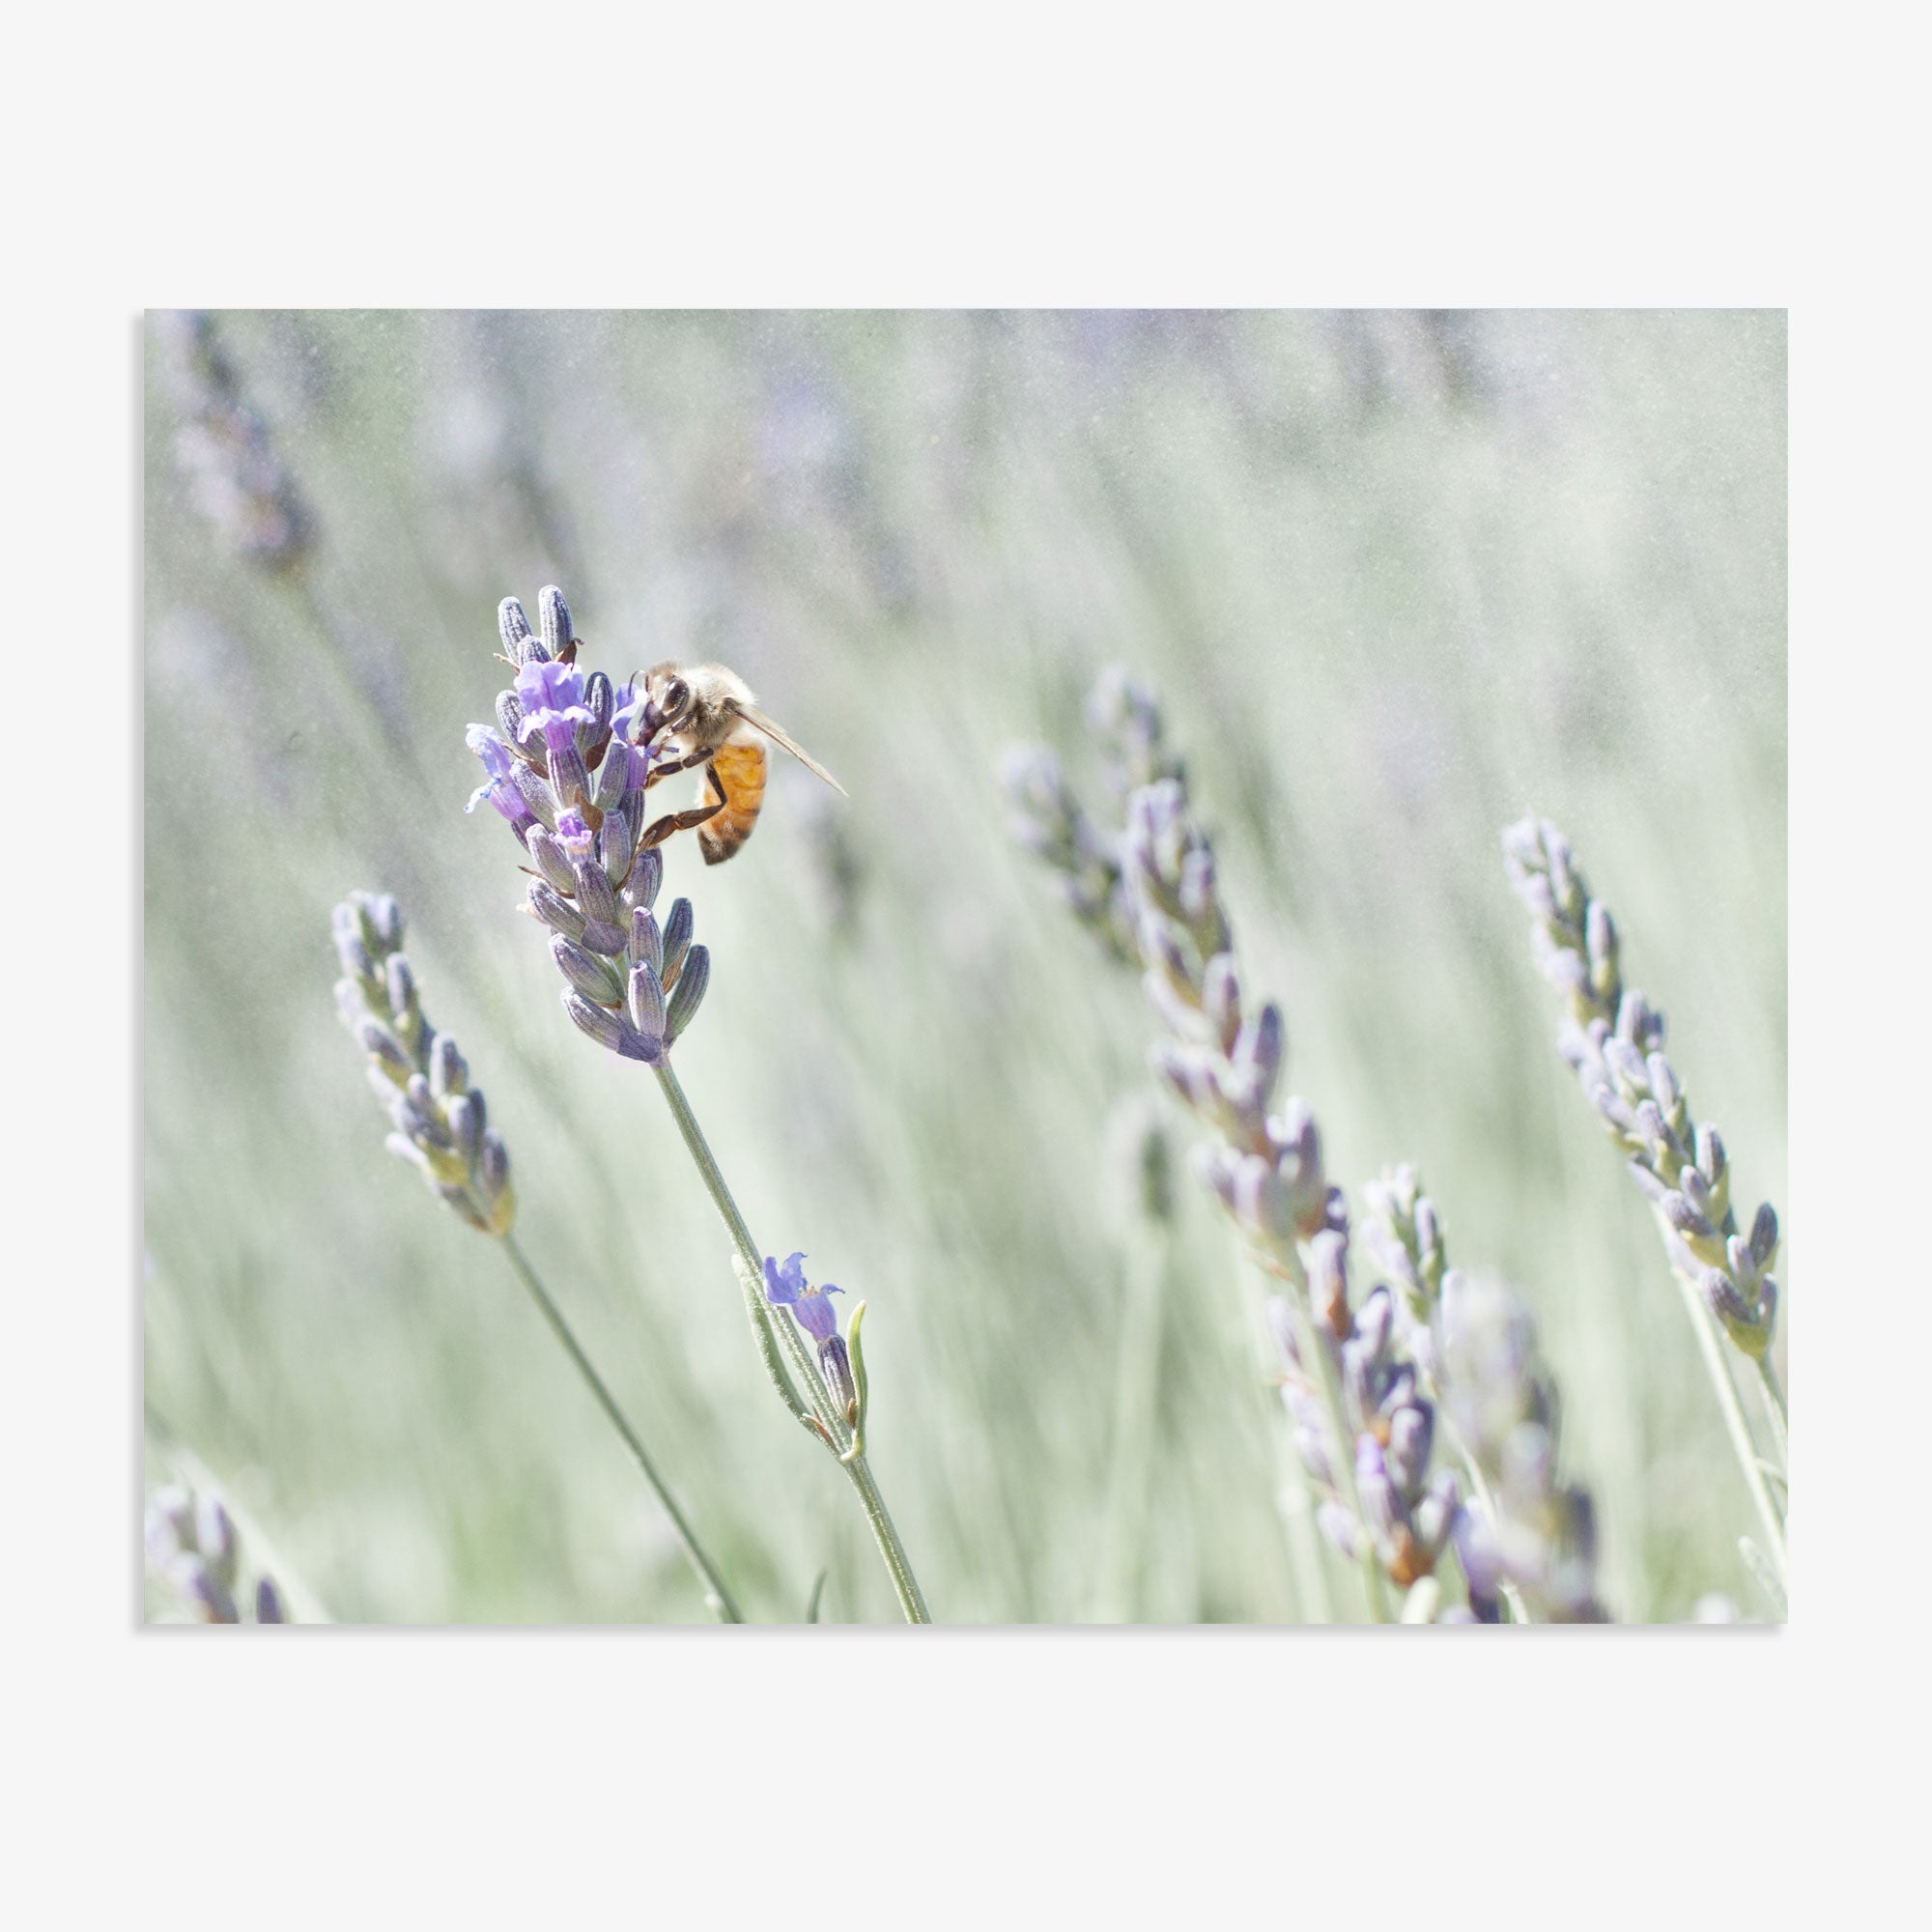 A honeybee gathers pollen on the purple flowers of a lavender plant at a lavender farm, with a soft-focus background enhancing the dreamy, pastel setting.